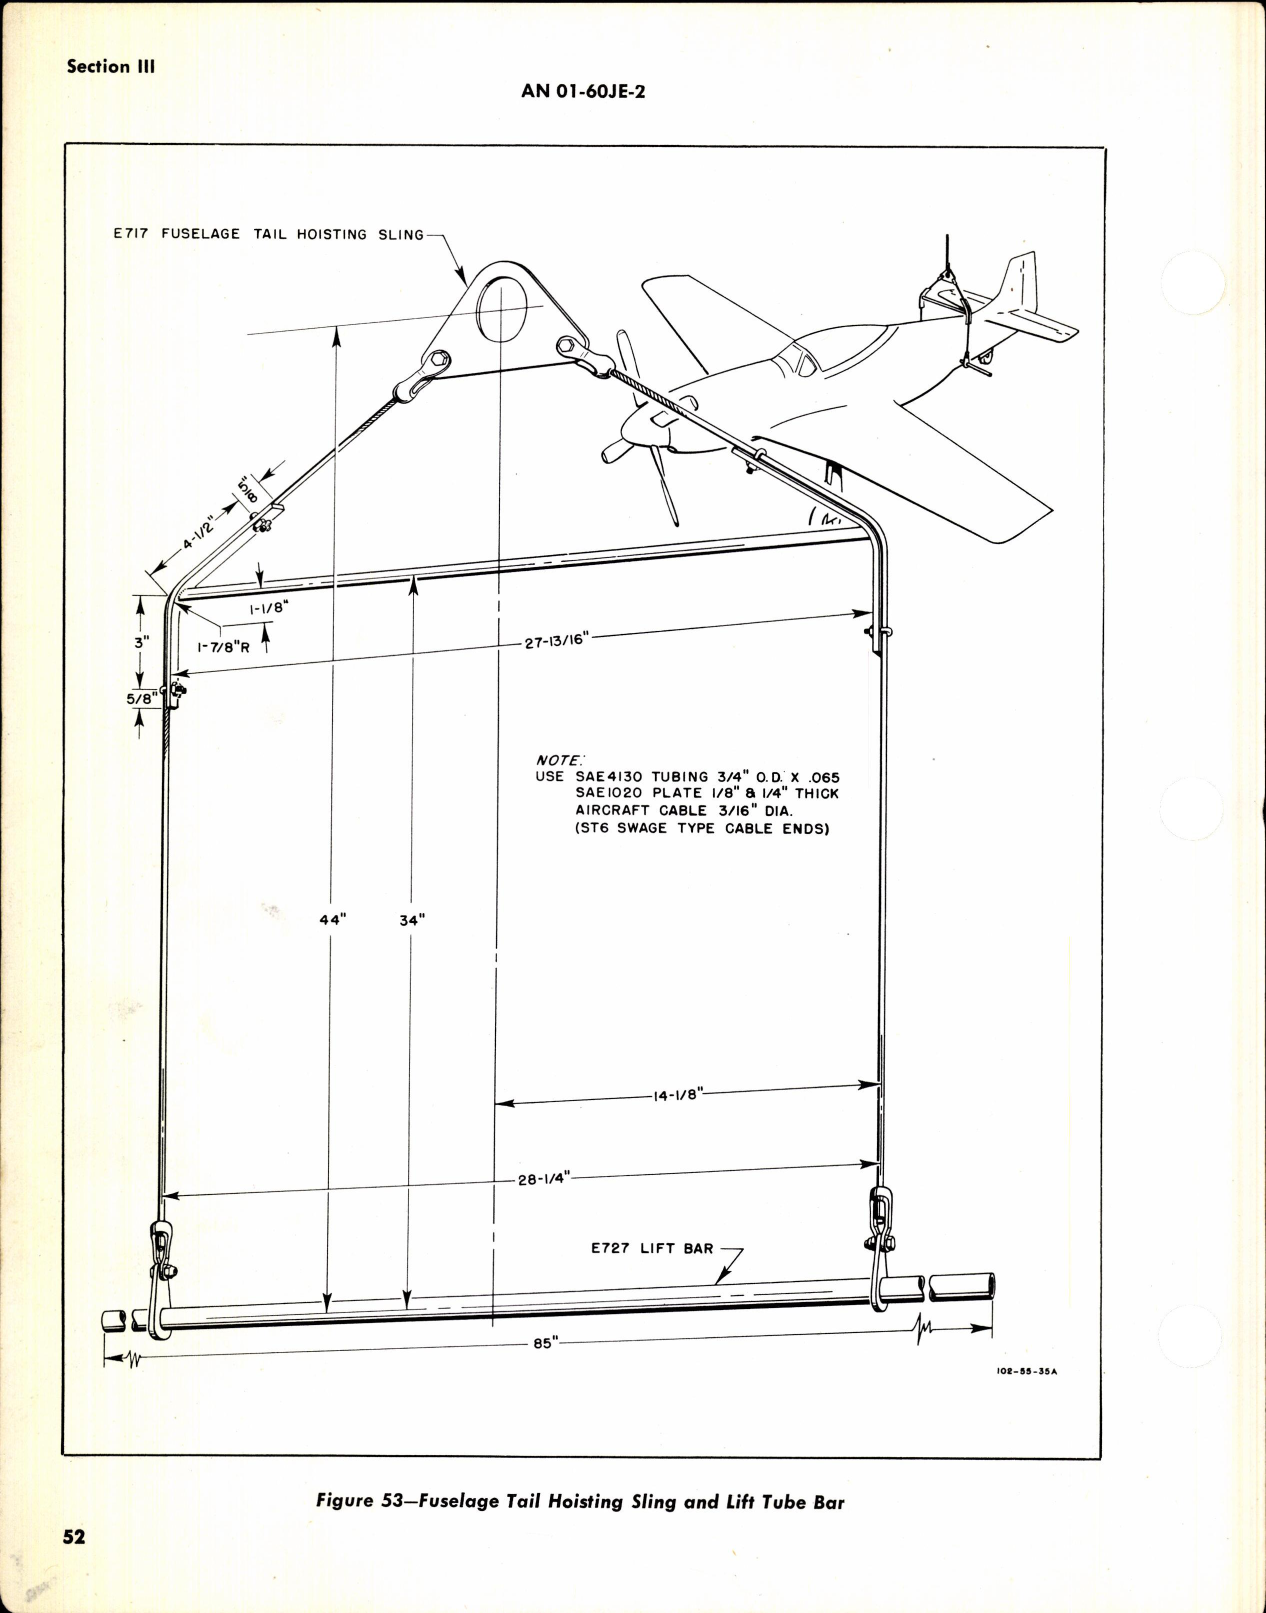 Sample page 30 from AirCorps Library document: Maintenance Instructions for F-51D, F-51M, ZF-51K, and TF-51D